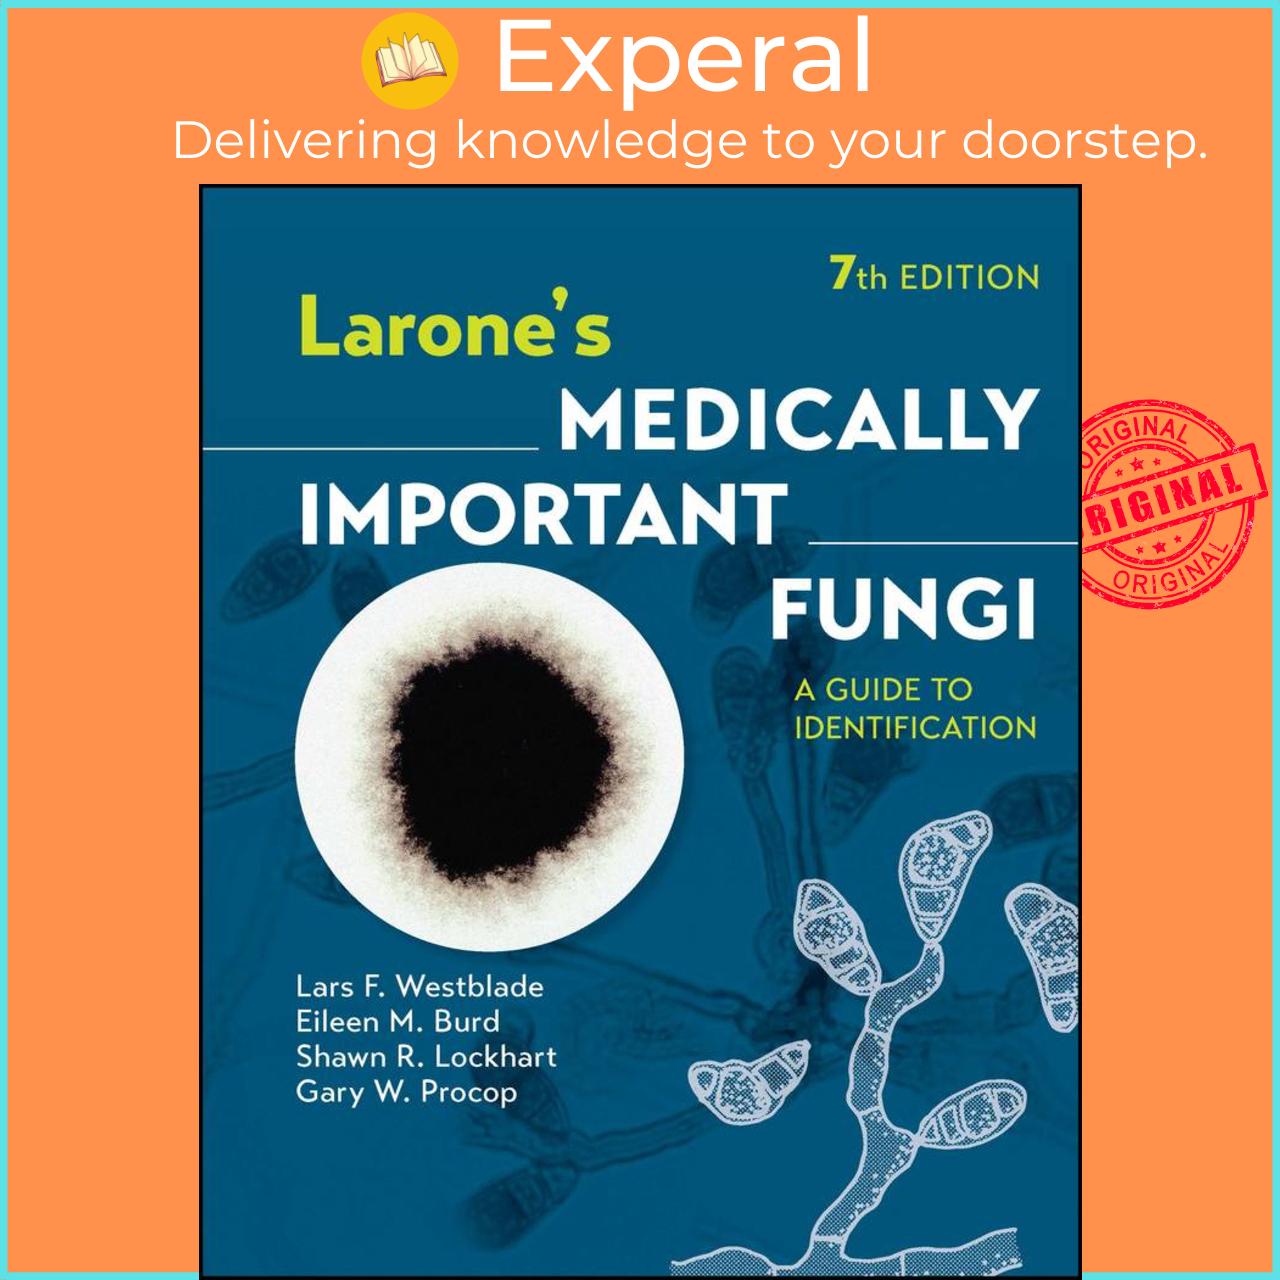 Hình ảnh Sách - Larone's Medically Important Fungi - A Guide to Identification by Gary W. Procop (US edition, hardcover)